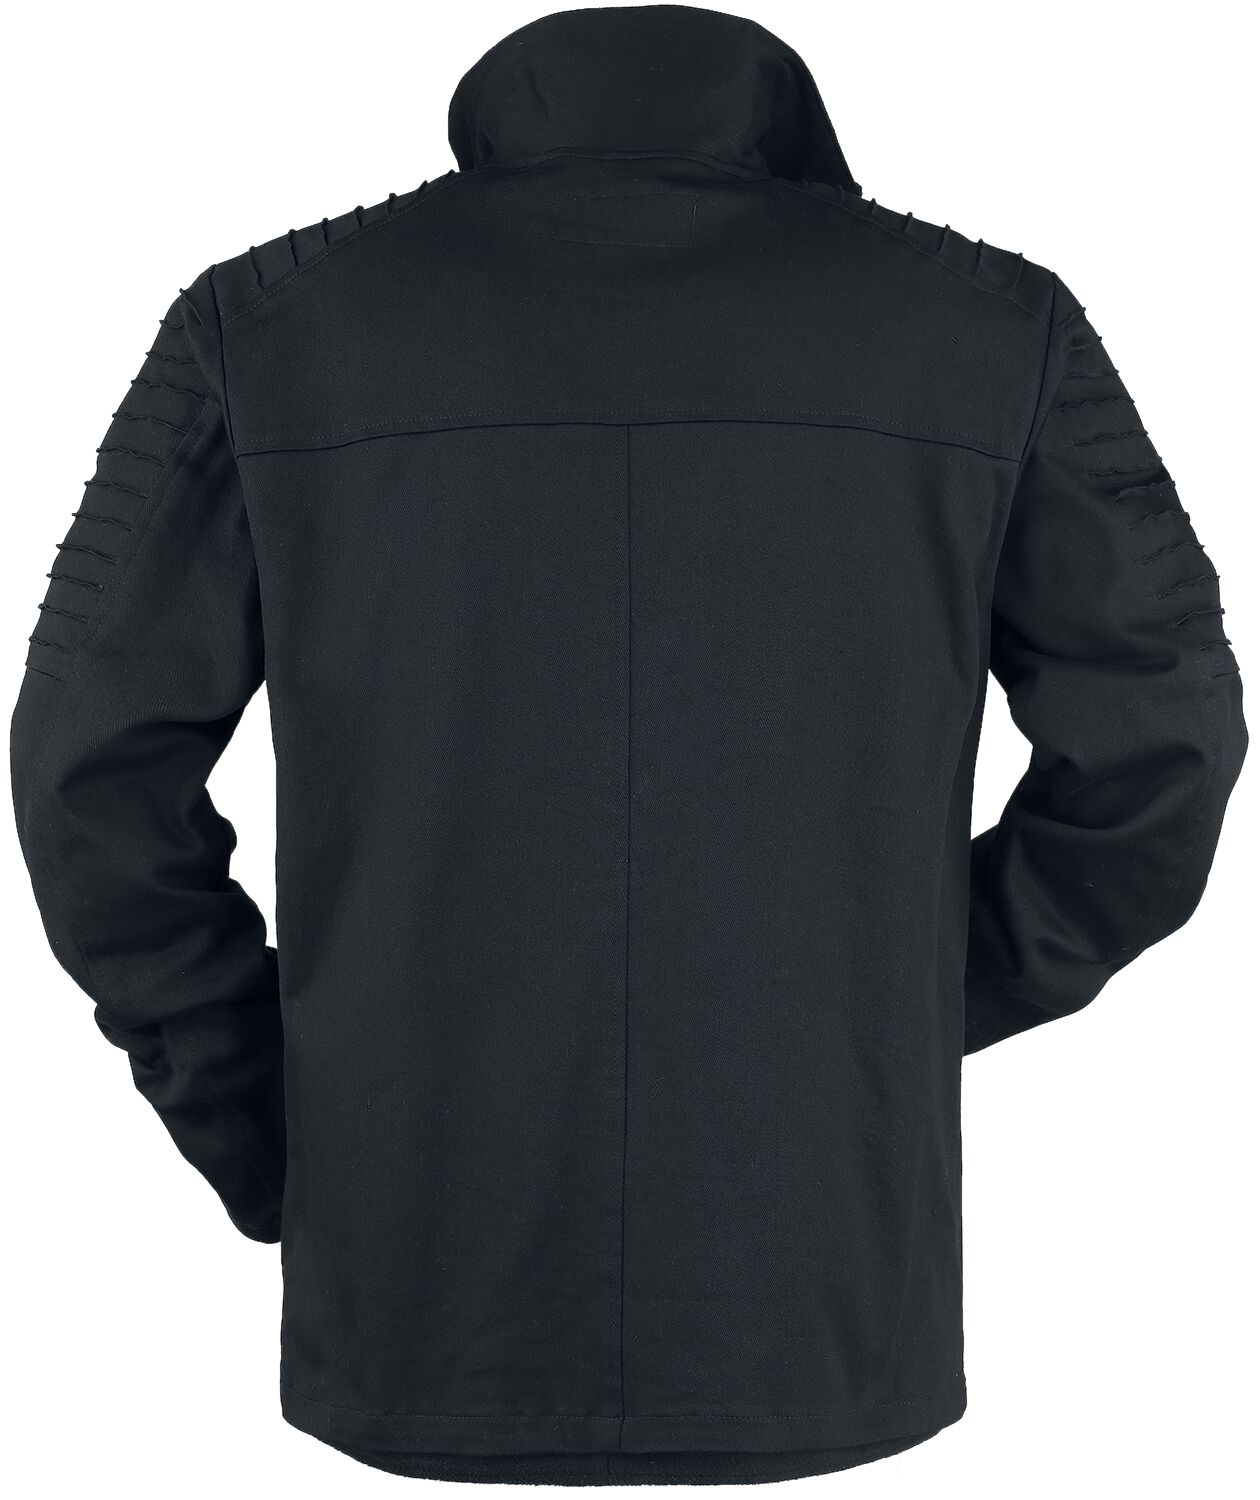 Winter jacket with flap pockets decorative seams | Gothicana by EMP ...